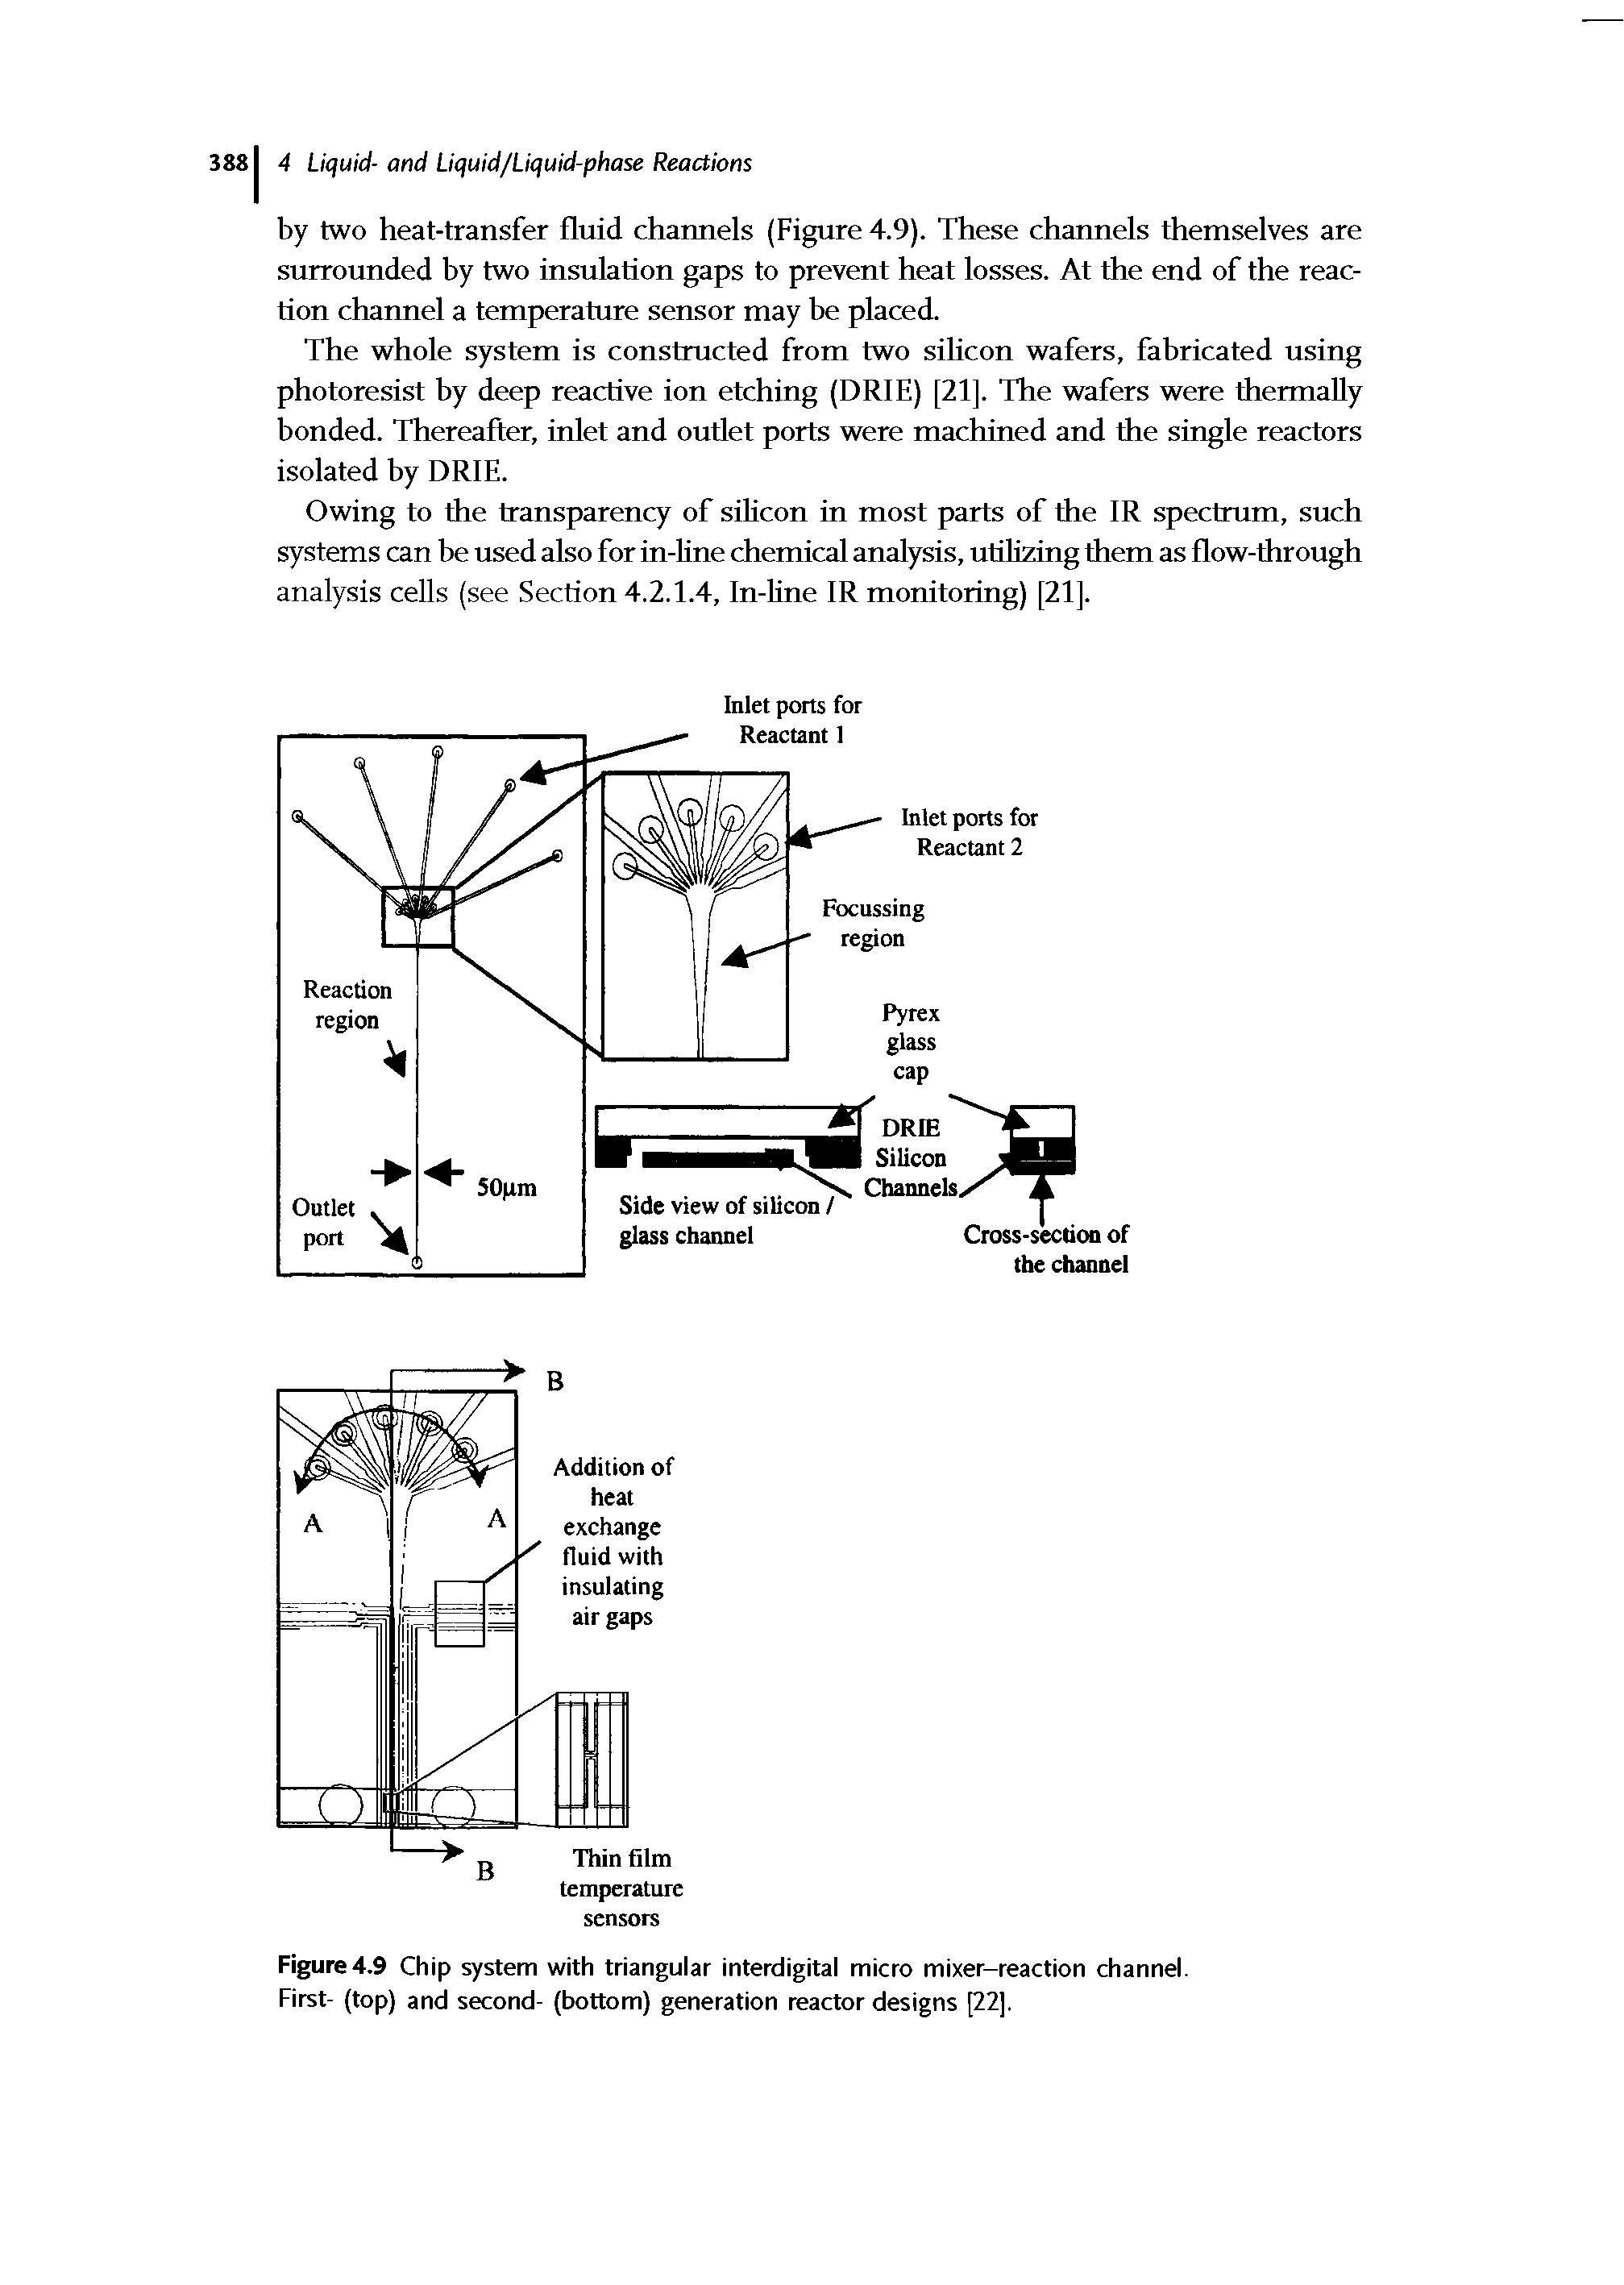 Figure4.9 Chip system with triangular interdigital micro mixer-reaction channel. First- (top) and second- (bottom) generation reactor designs [22],...